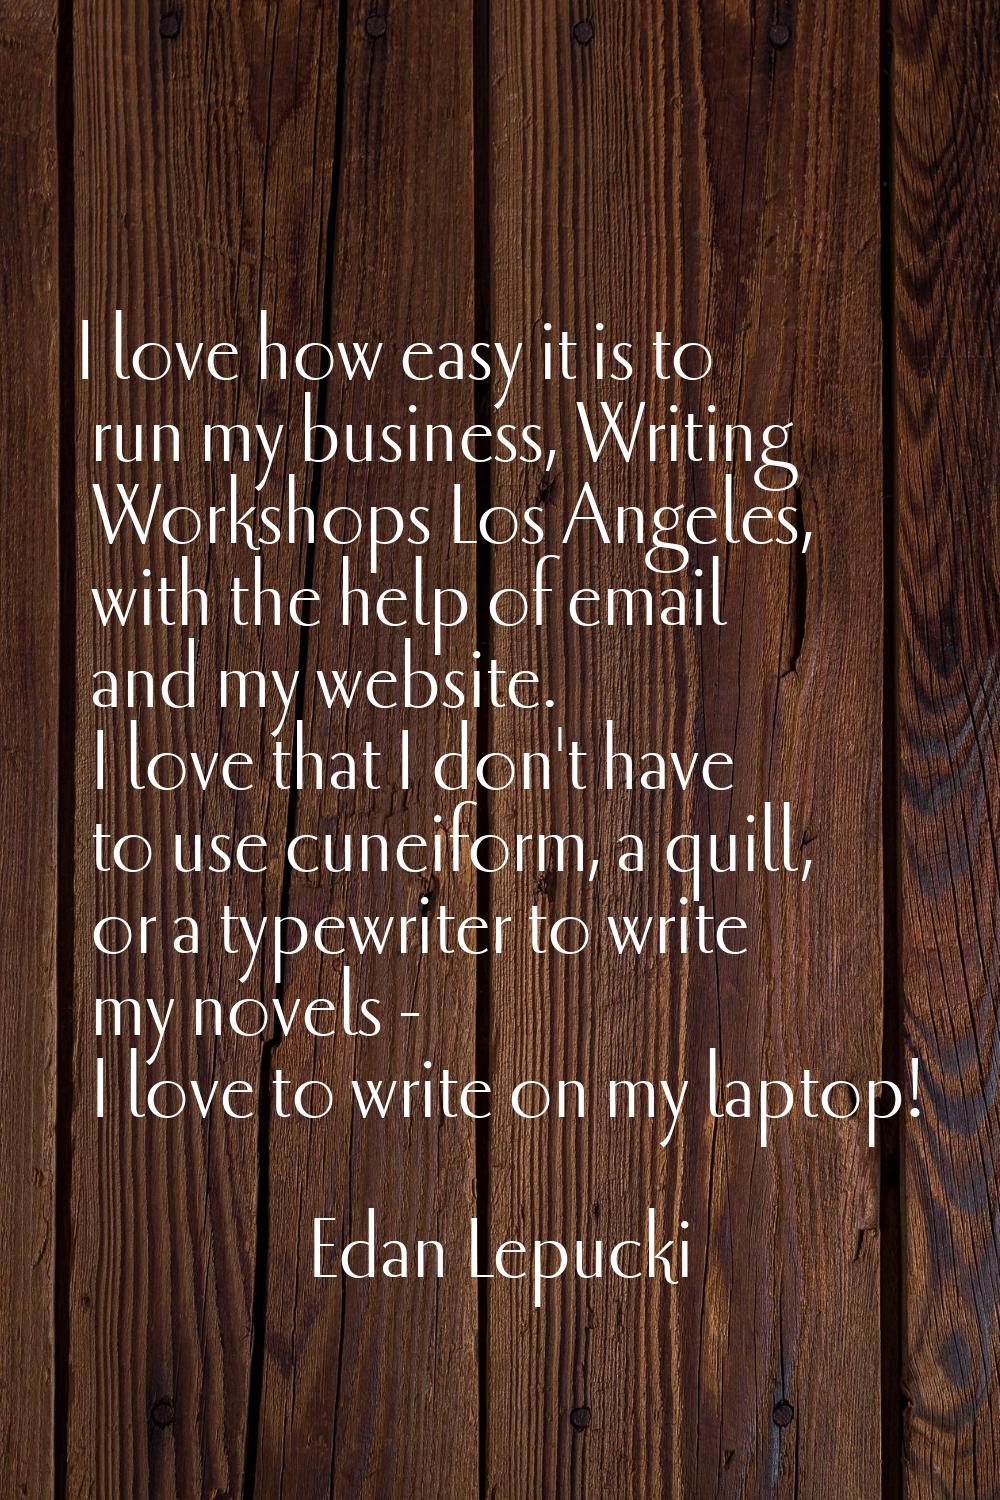 I love how easy it is to run my business, Writing Workshops Los Angeles, with the help of email and